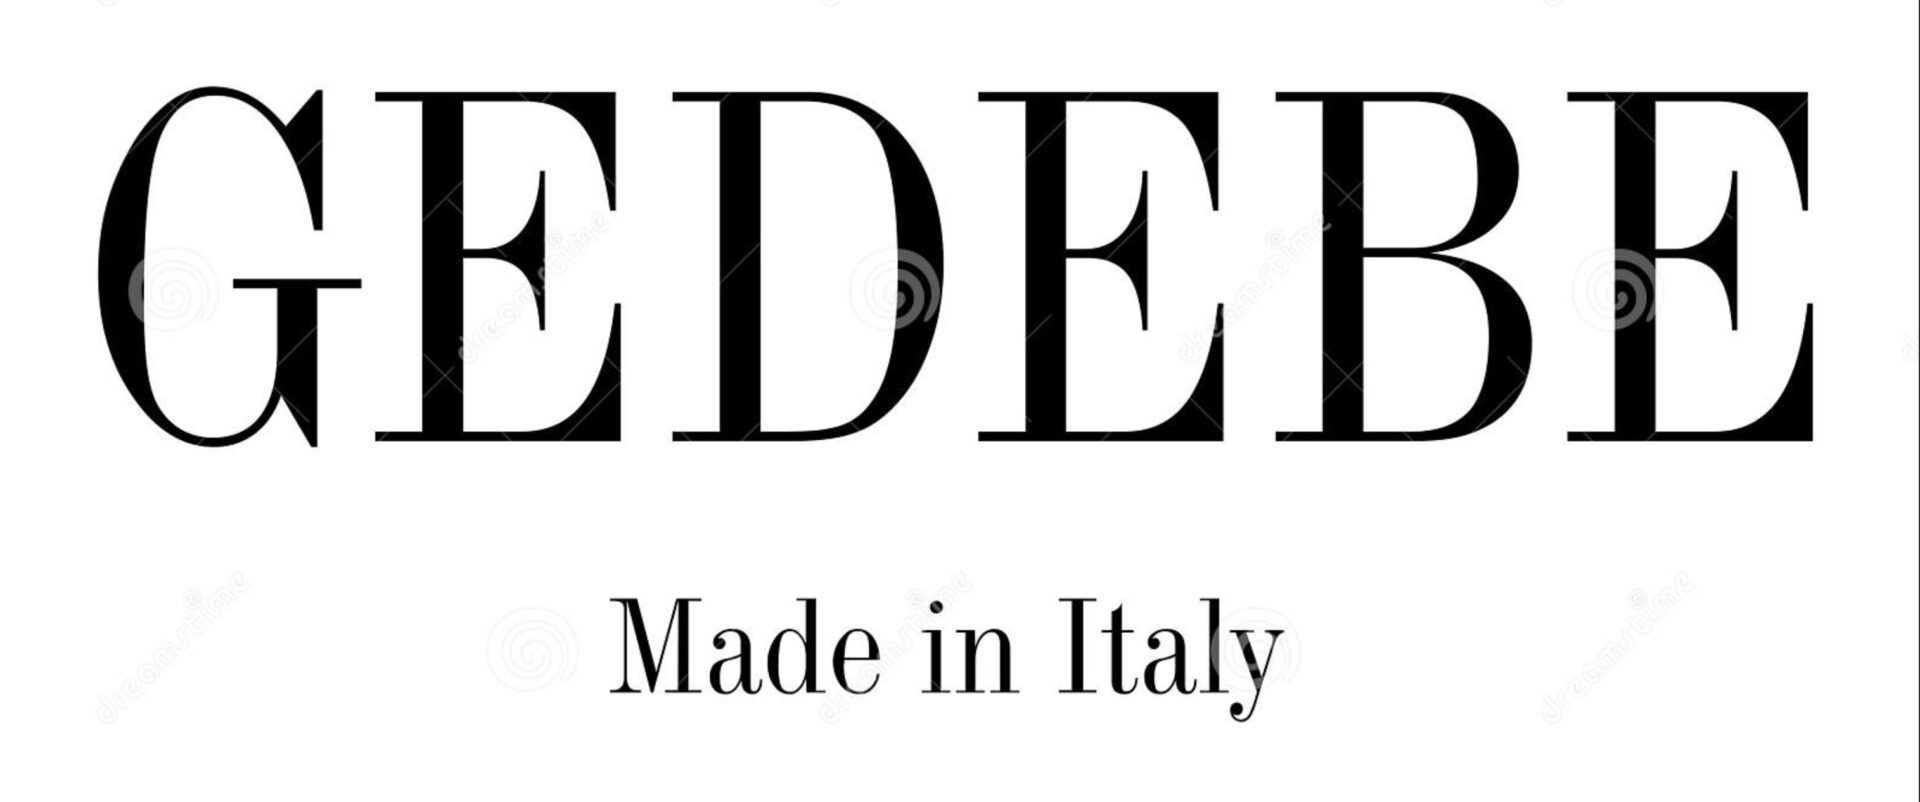 Gedebe | Made in Italy